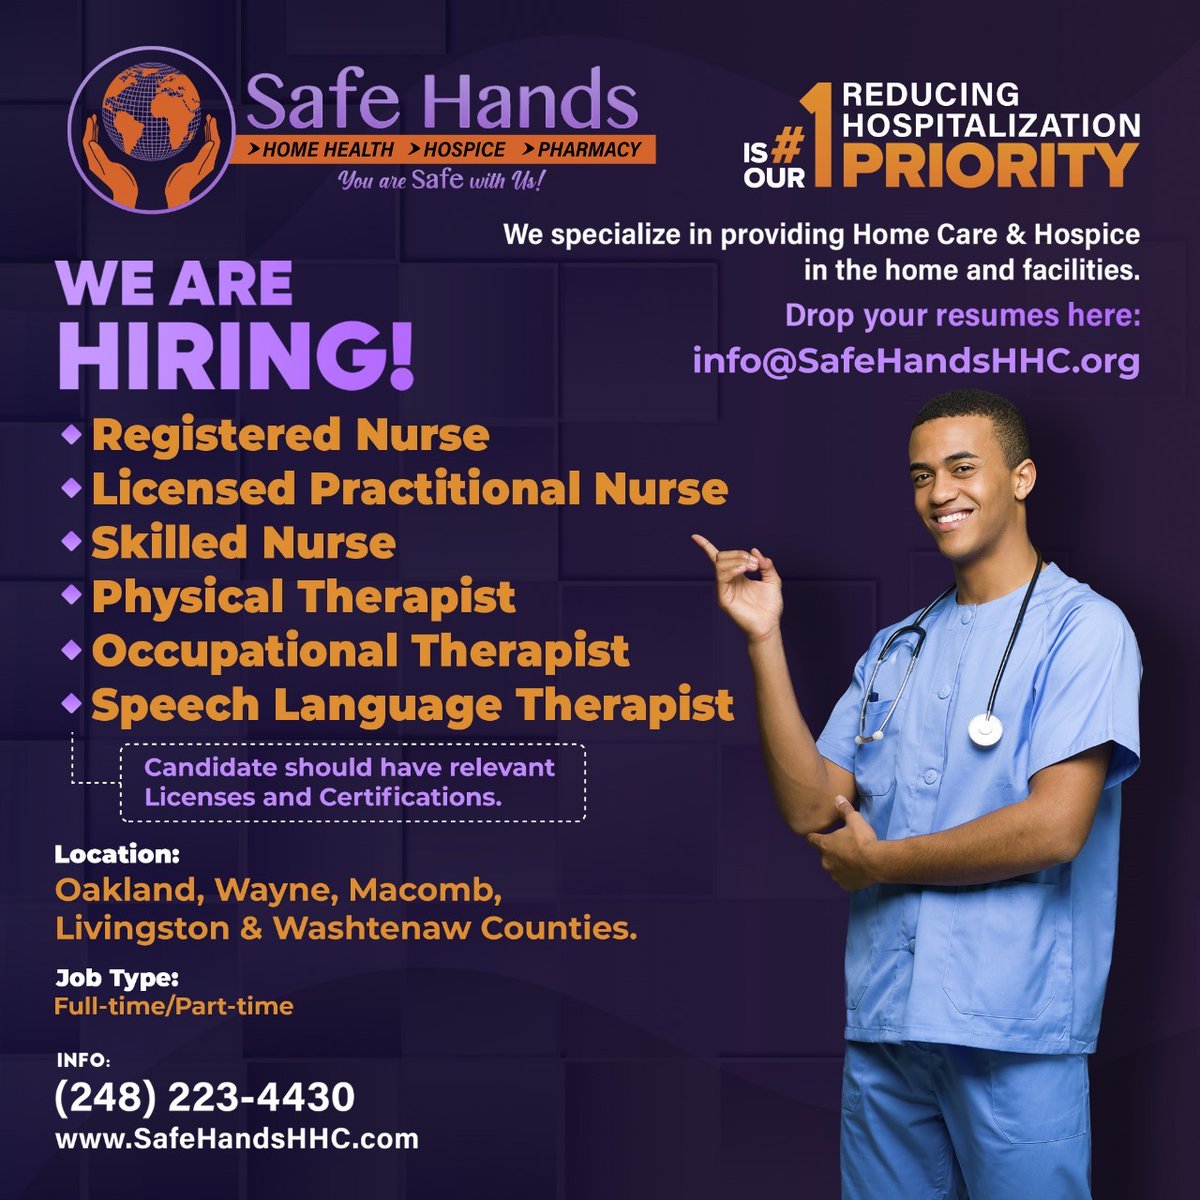 Join our mission to provide outstanding care! 🌟 We're on the lookout for passionate healthcare professionals. 🏥💼

Feel free to contact us now: +1 (248) 223-4430
or
Visit us: safehandshhc.com

#NowHiring #HealthcareHeroes #SafeHandsCareers #NursingJobs #TherapistCareers